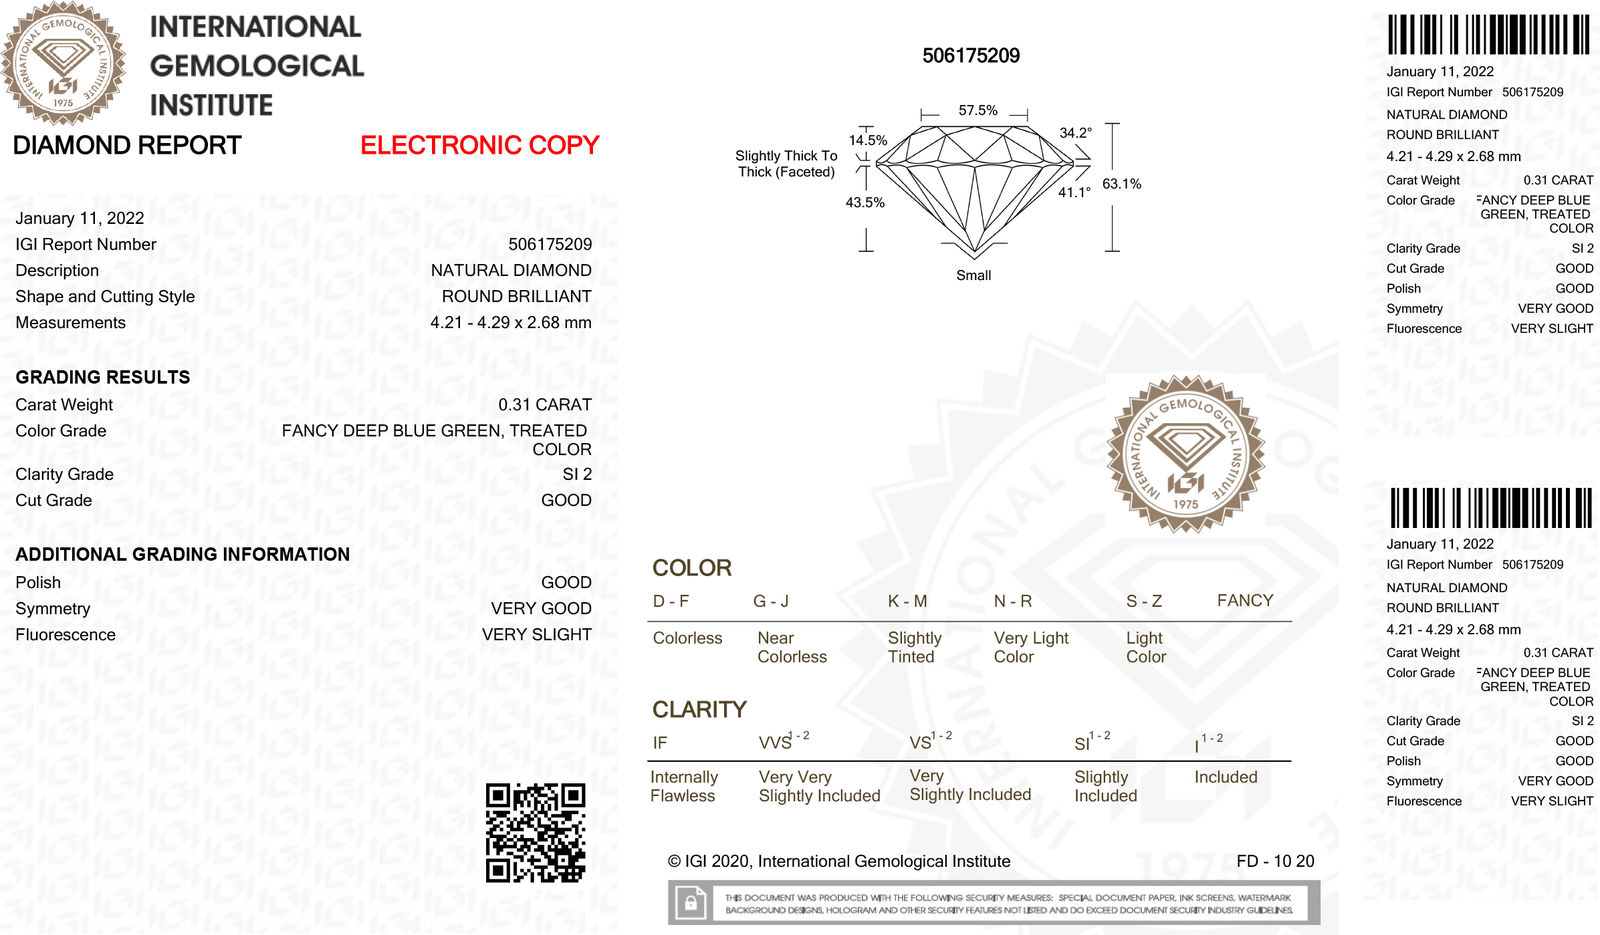 View Images for the Real Certificate